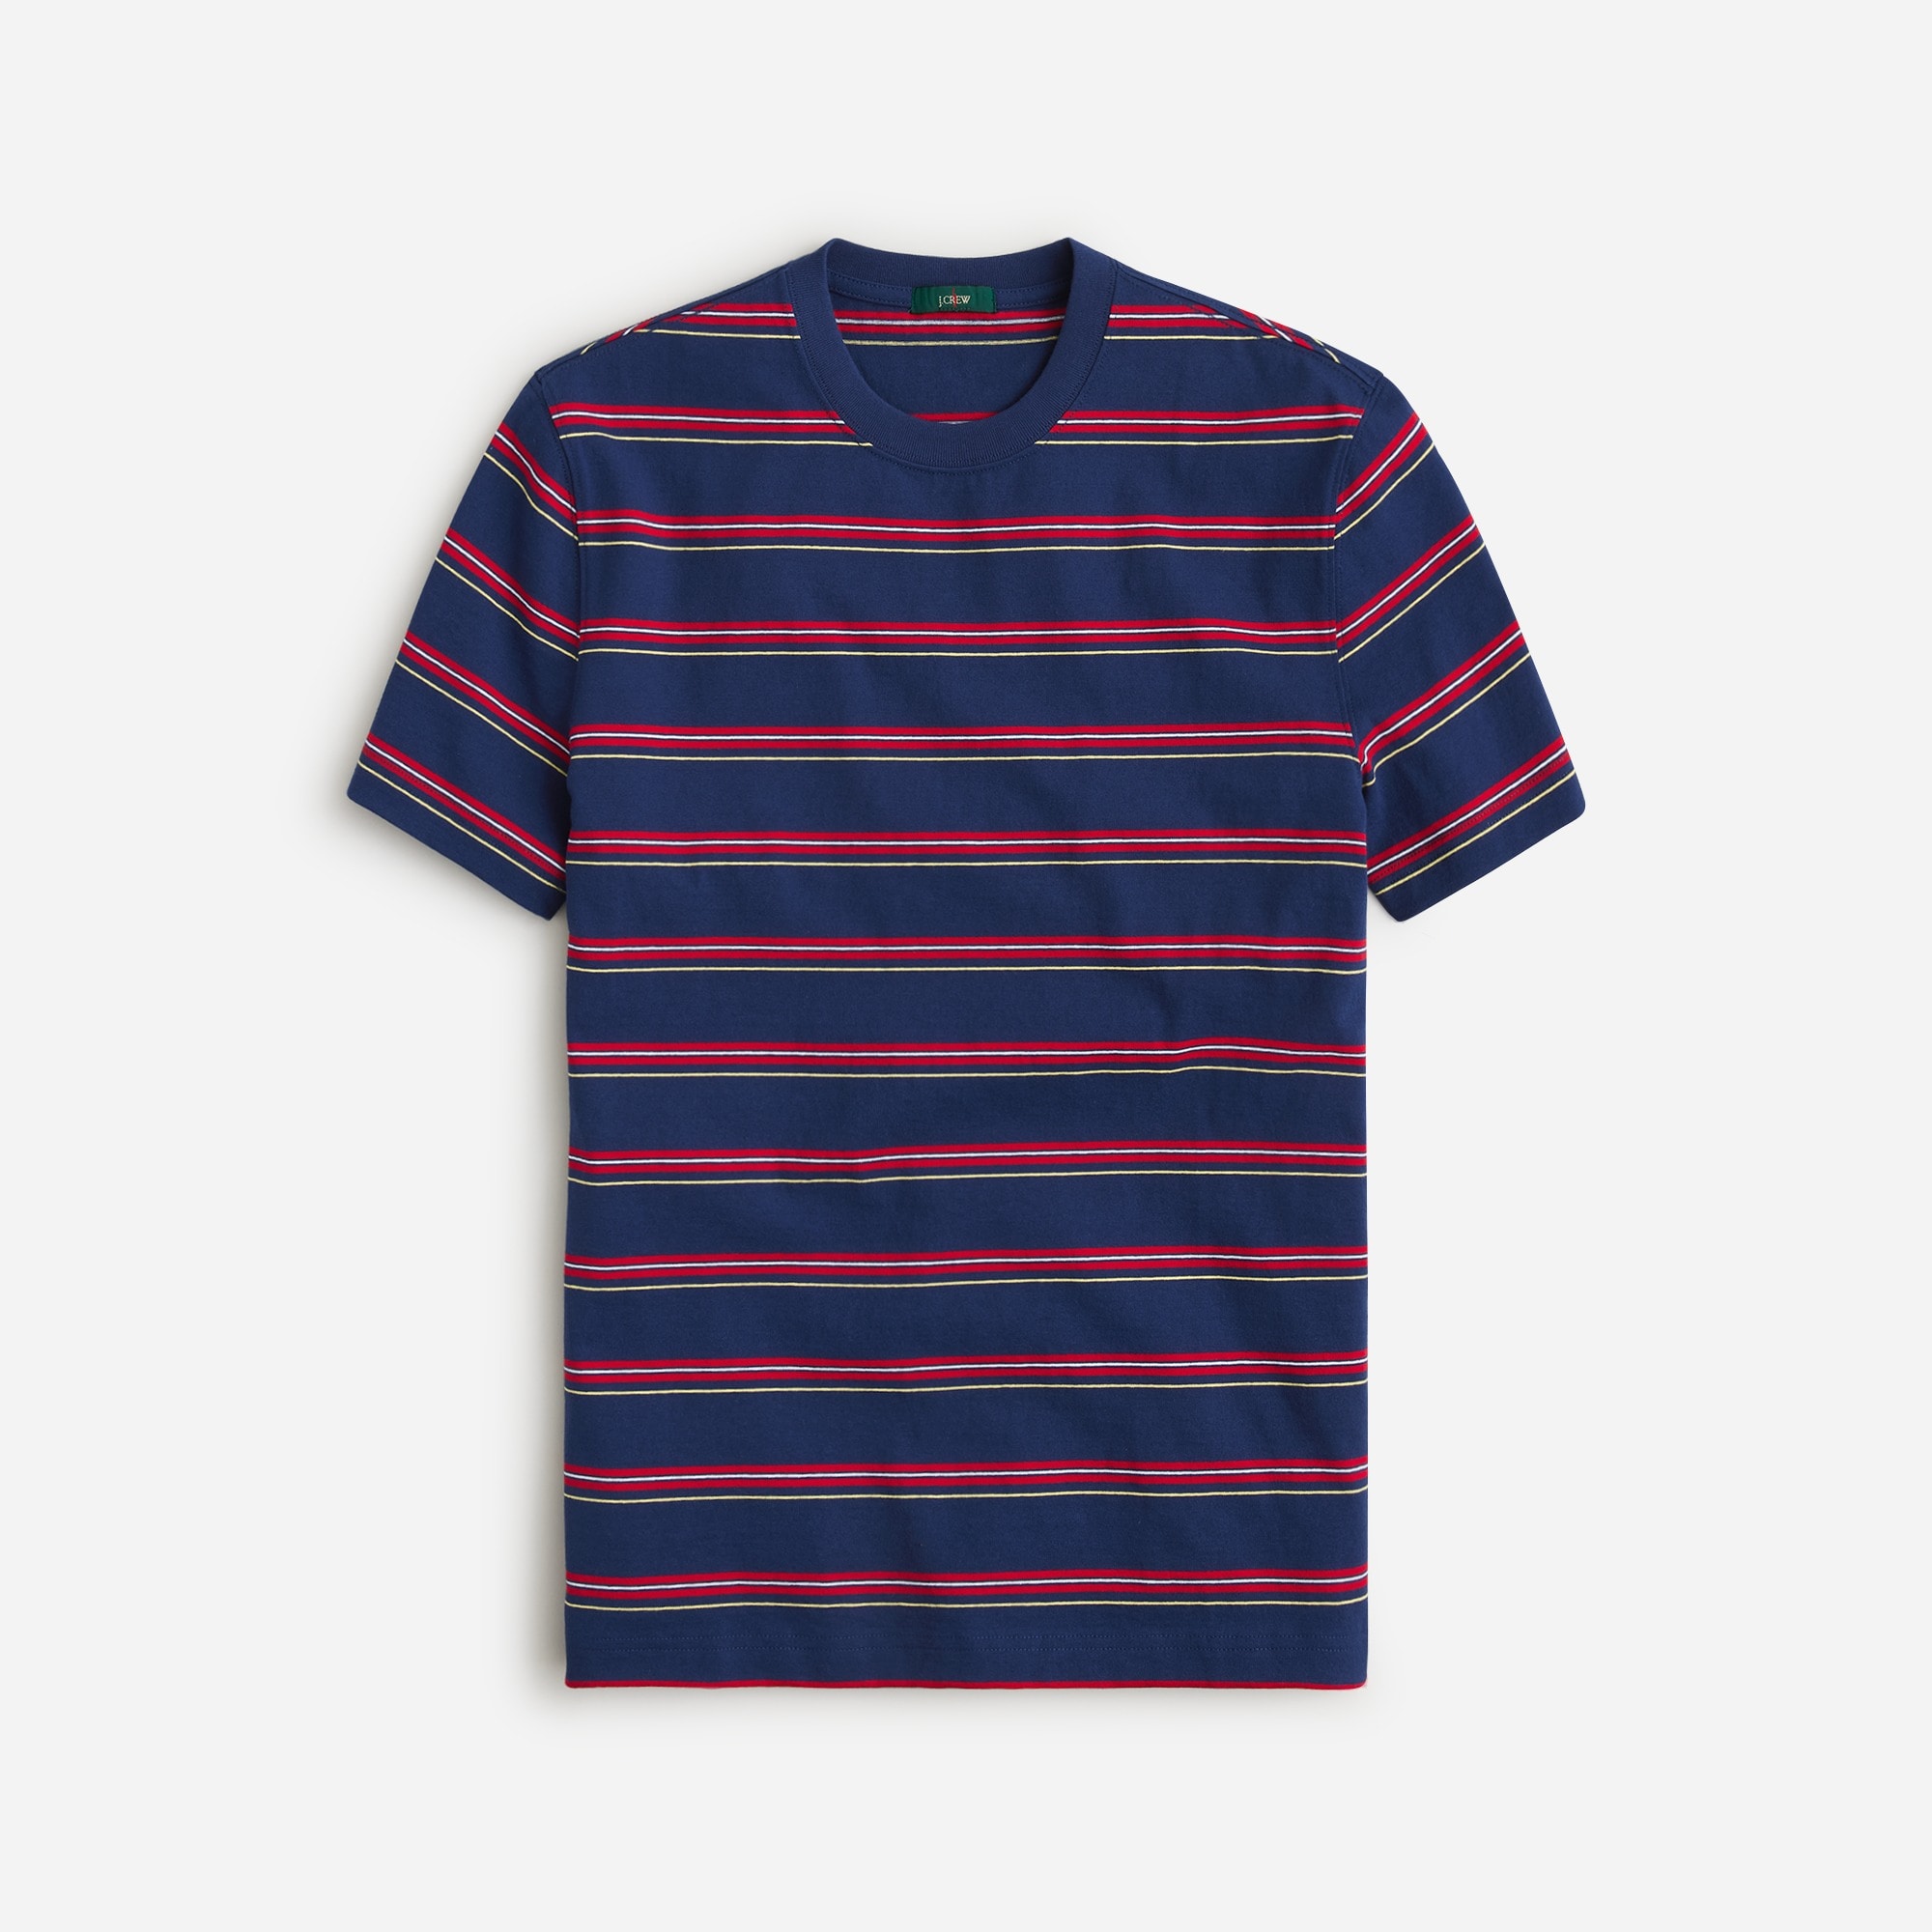 mens Relaxed premium-weight cotton T-shirt in stripe